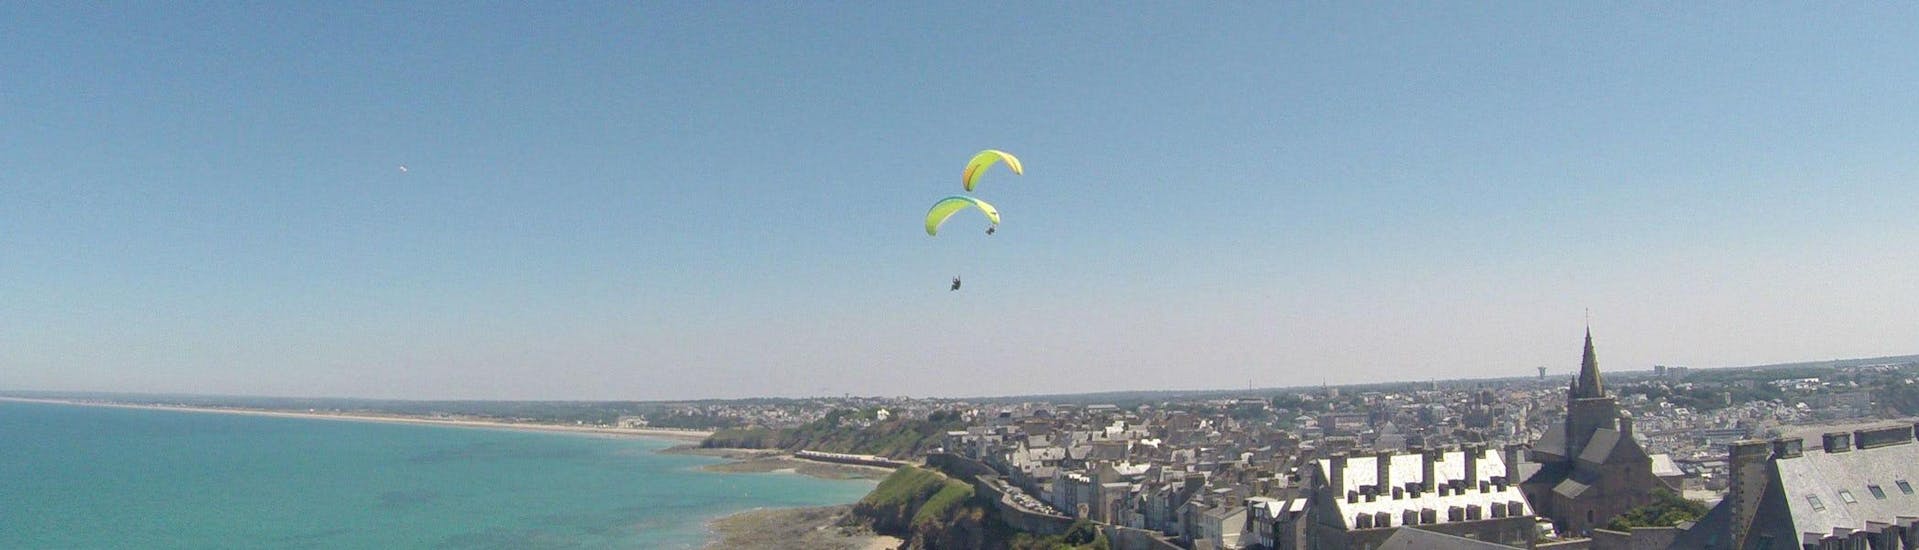 Two persons are enjoying the activity Tandem Paragliding "Granville" - Normandie with Parapente Mania.